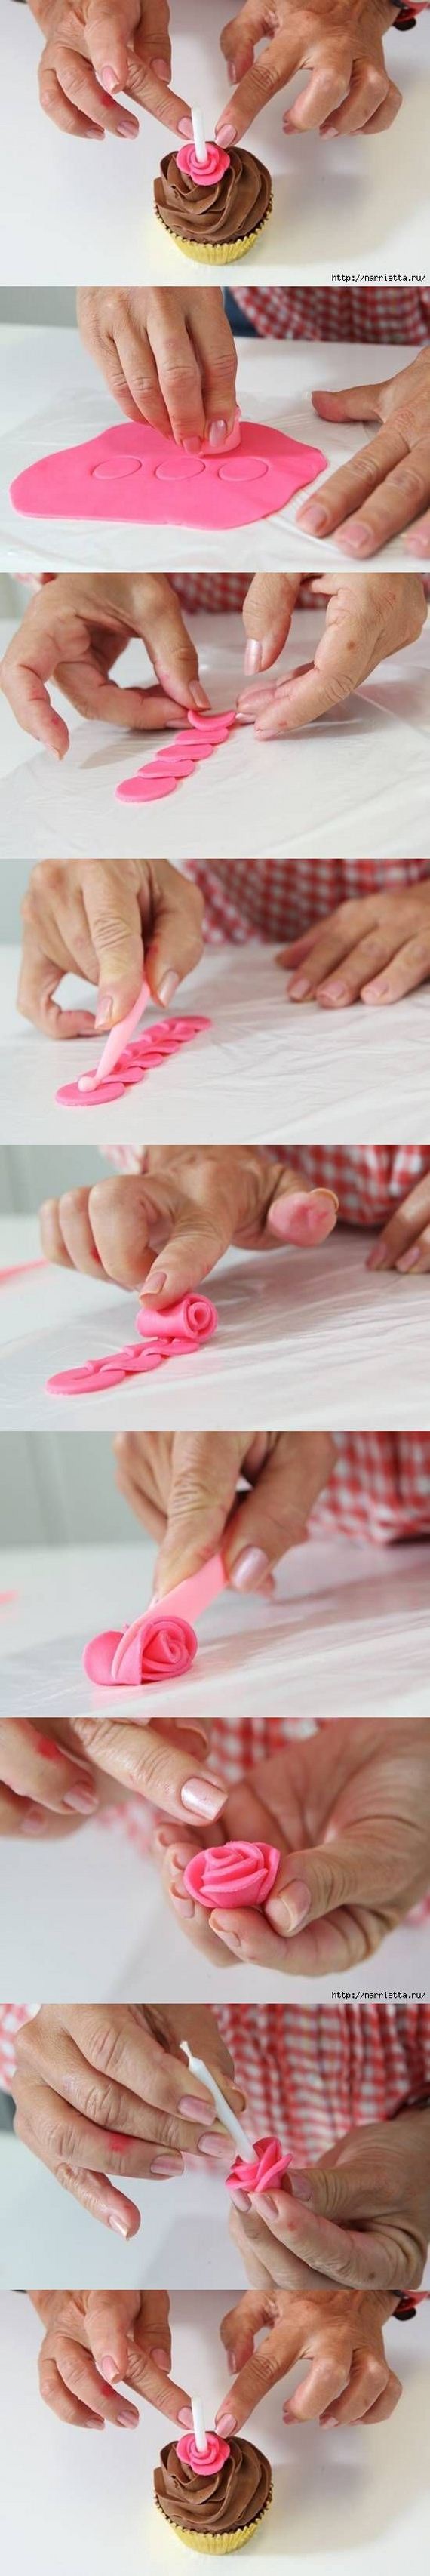 04-Rose-DIY-Projects